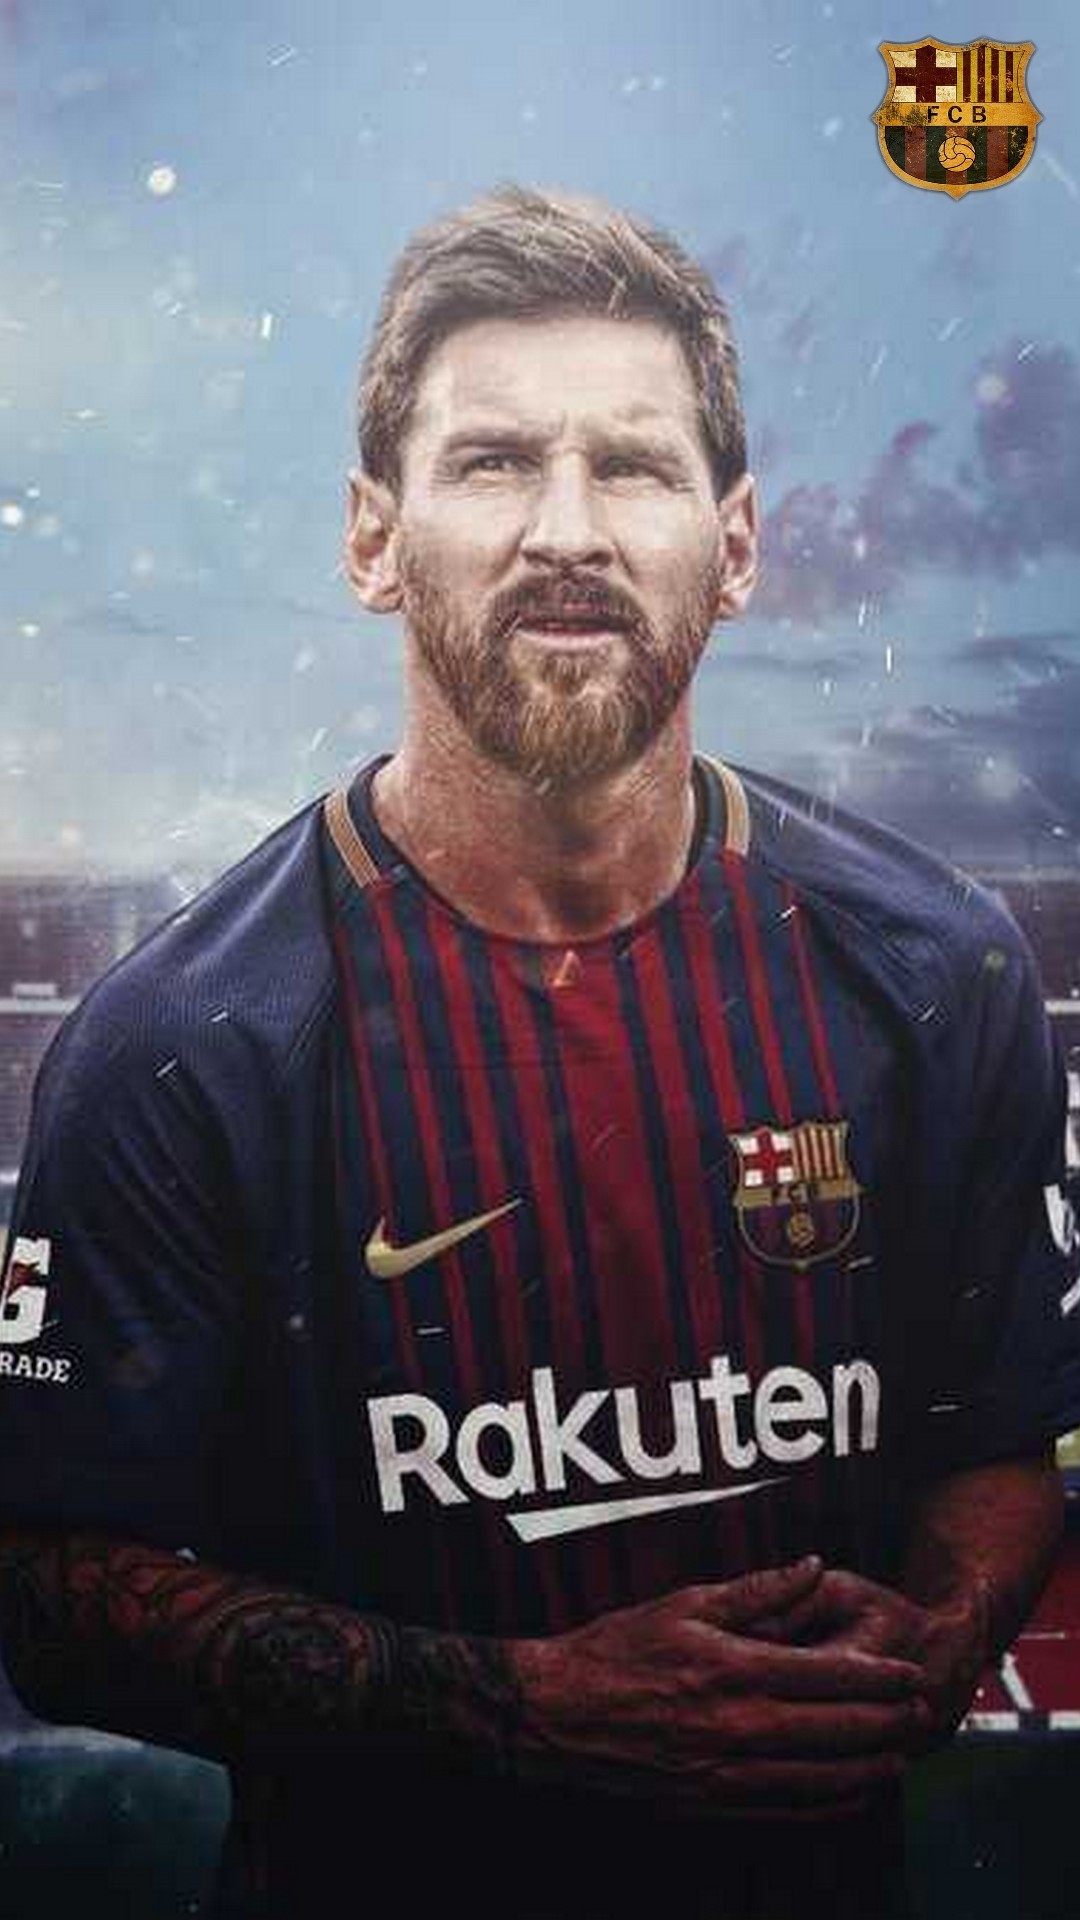 Lionel Messi iPhone 8 Wallpaper With Resolution 1080X1920 pixel. You can make this wallpaper for your Mac or Windows Desktop Background, iPhone, Android or Tablet and another Smartphone device for free